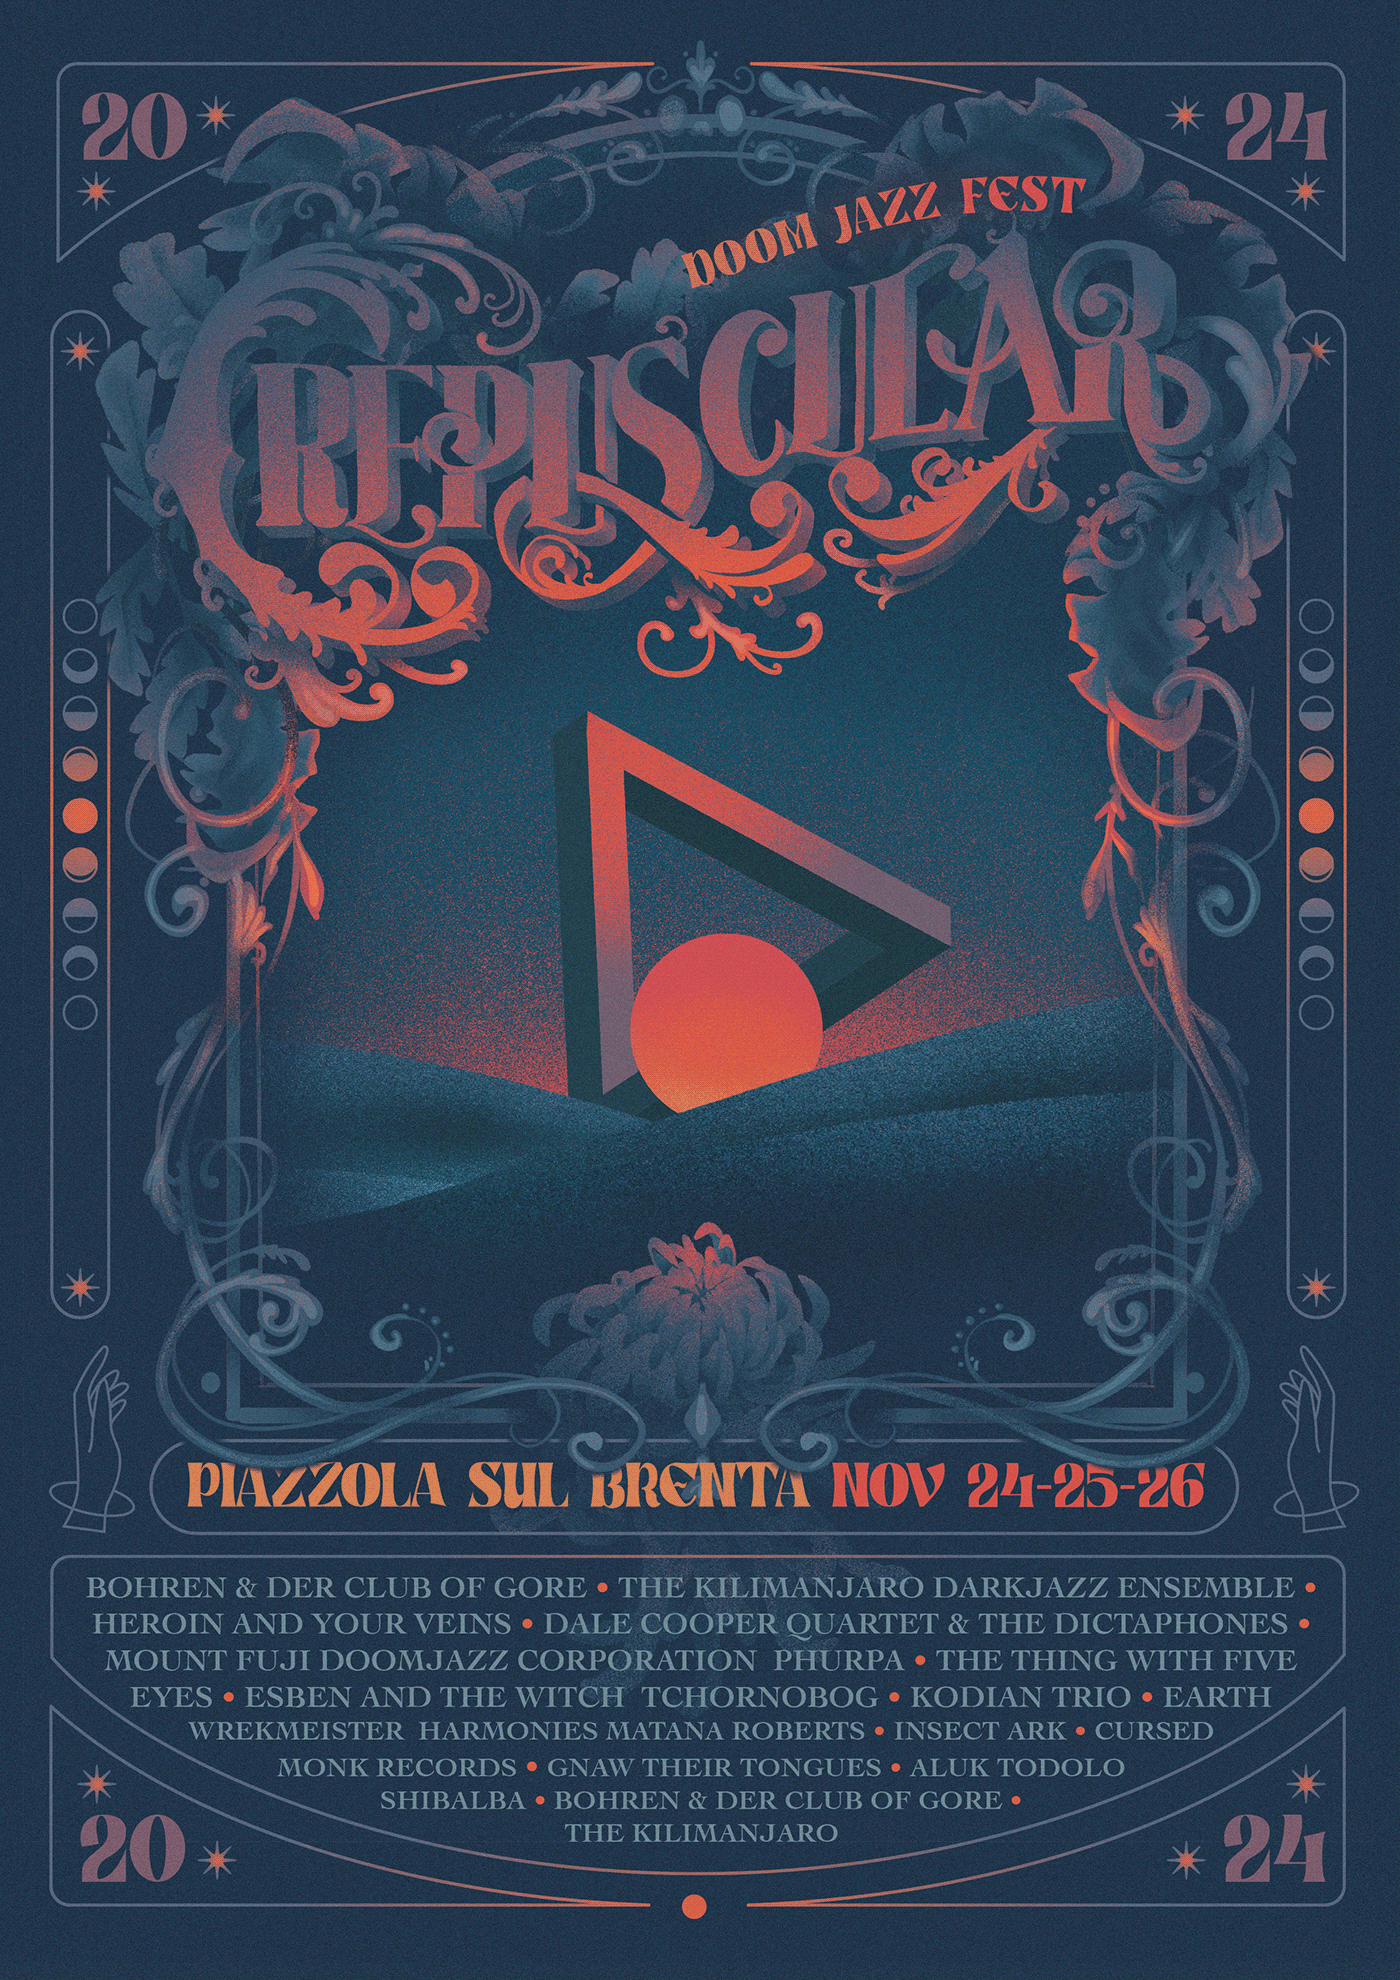 The poster of the project, containing the logo, an illustration, and the list of the bands.